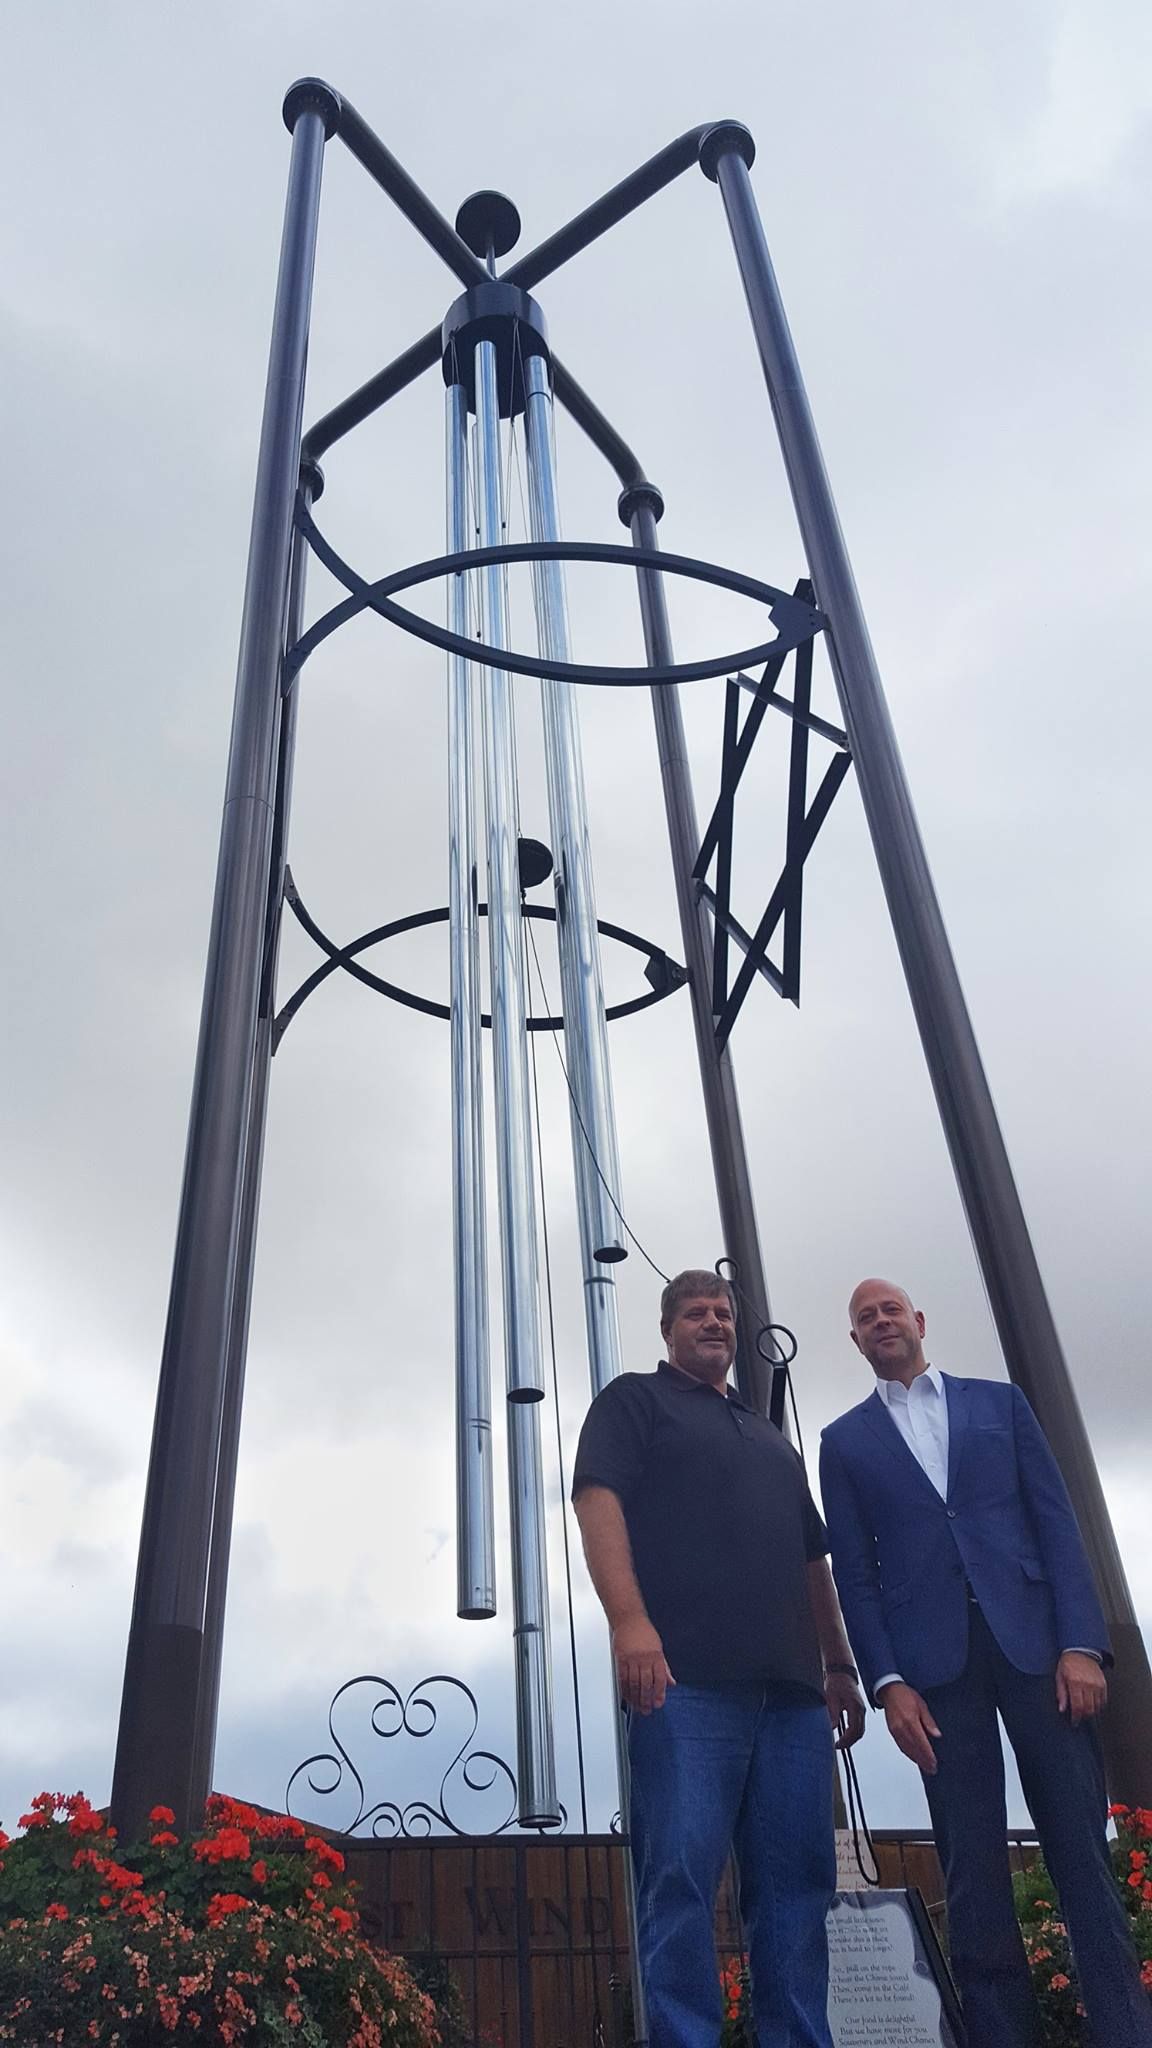 World's Largest Wind Chime, world record in Casey, Illinois